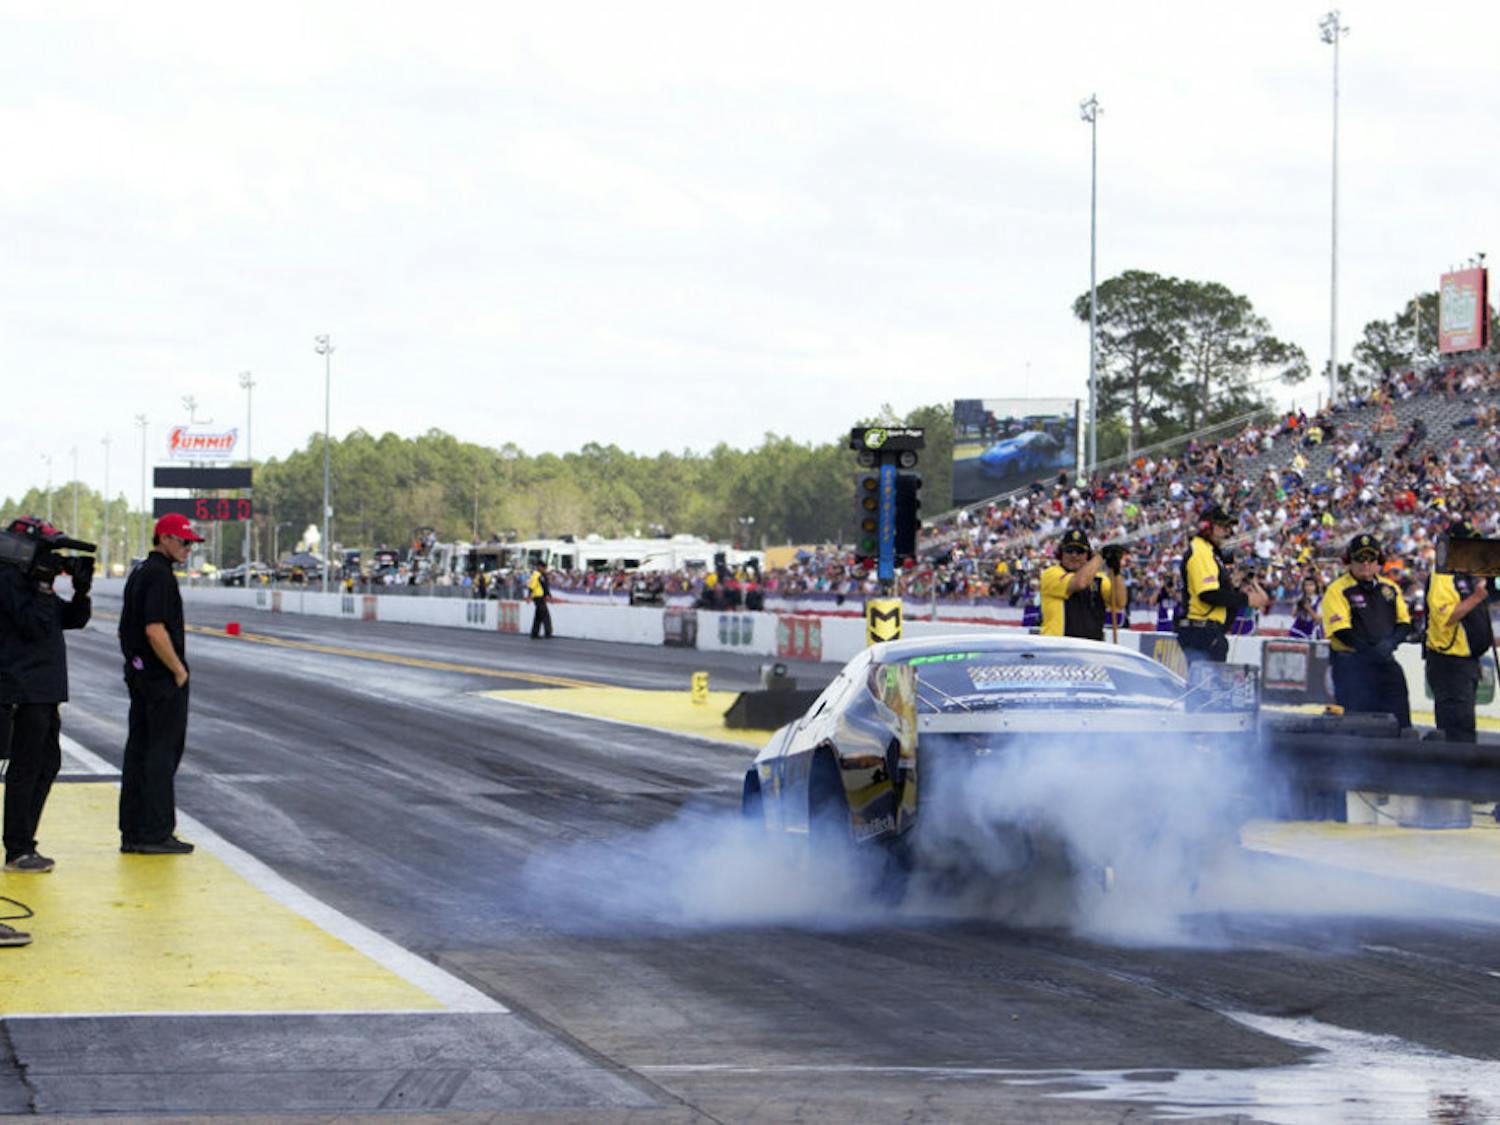 Kevin Fiscus, driving a 2012 Mustang, takes off from the starting line. The Pro Modified car reached speeds up to 246 mph.